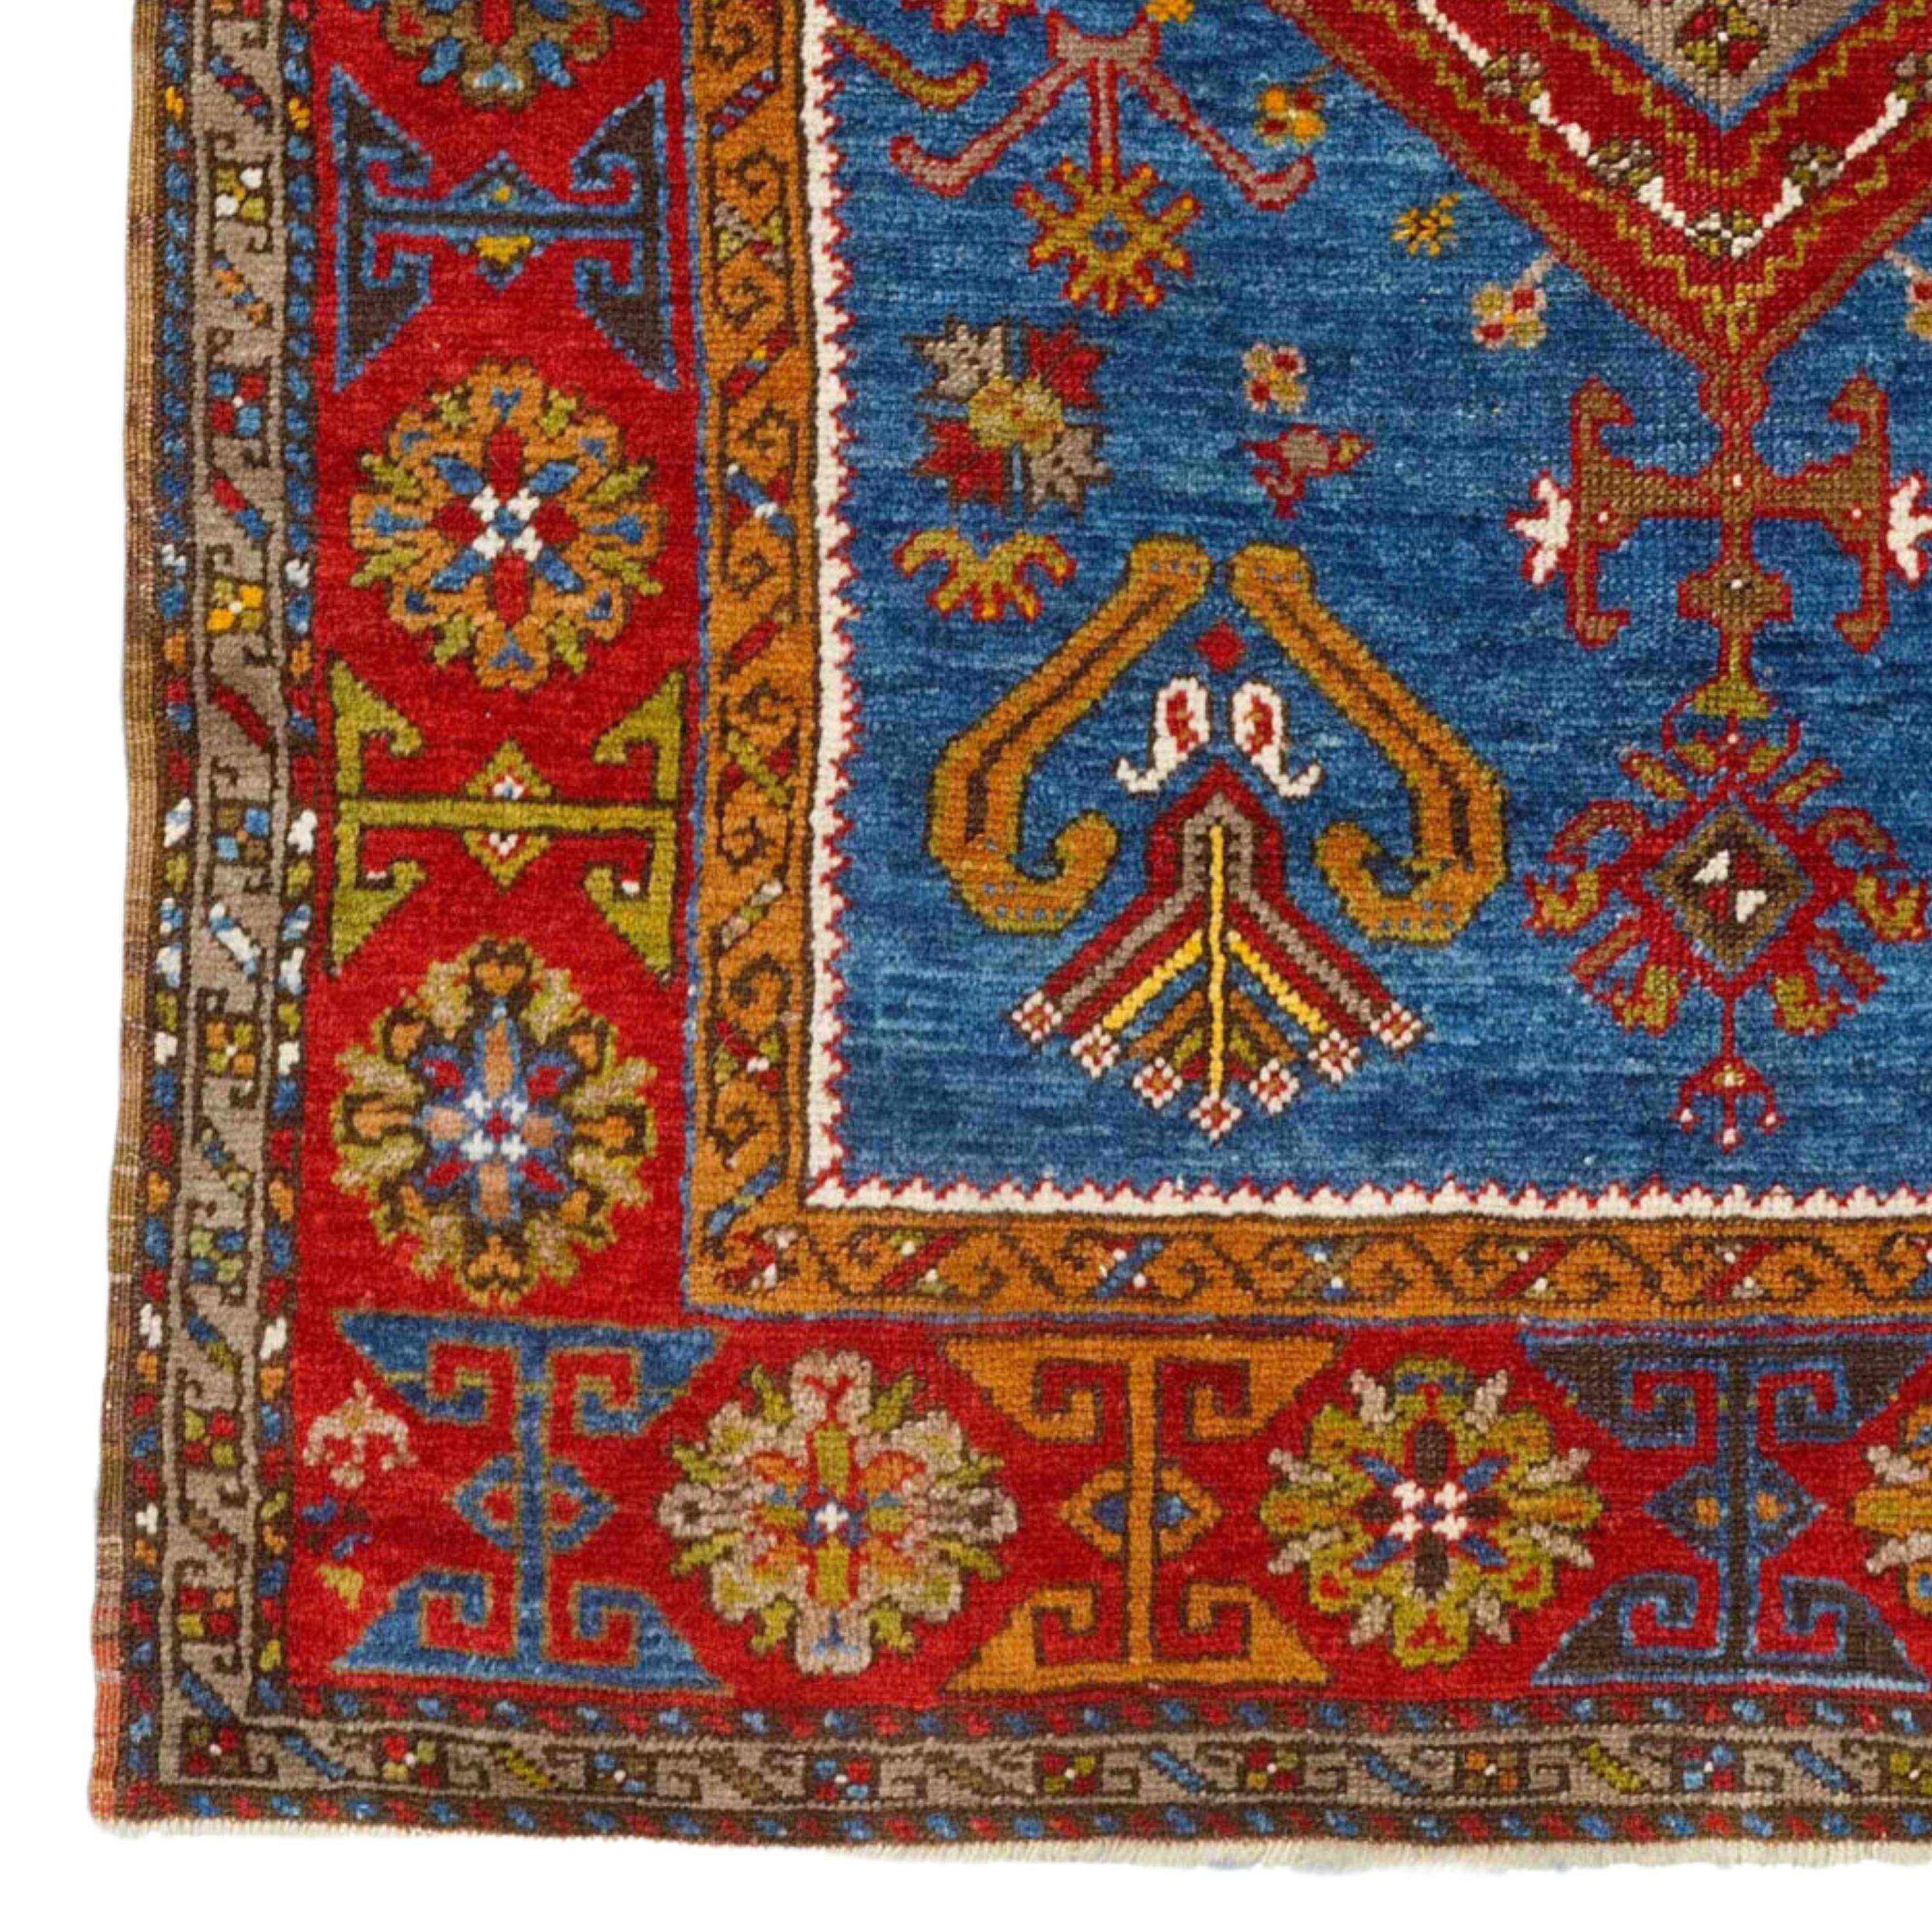 Late of 19th Century Central Anatolian Yahyali Rug in Perfect Condition Size 96 x 136 cm (3,14 x 4,46 ft)

The Yahyali weavers produced very popular rugs of especially fine quality as are the Kayseri oriental rugs also made in the Province of